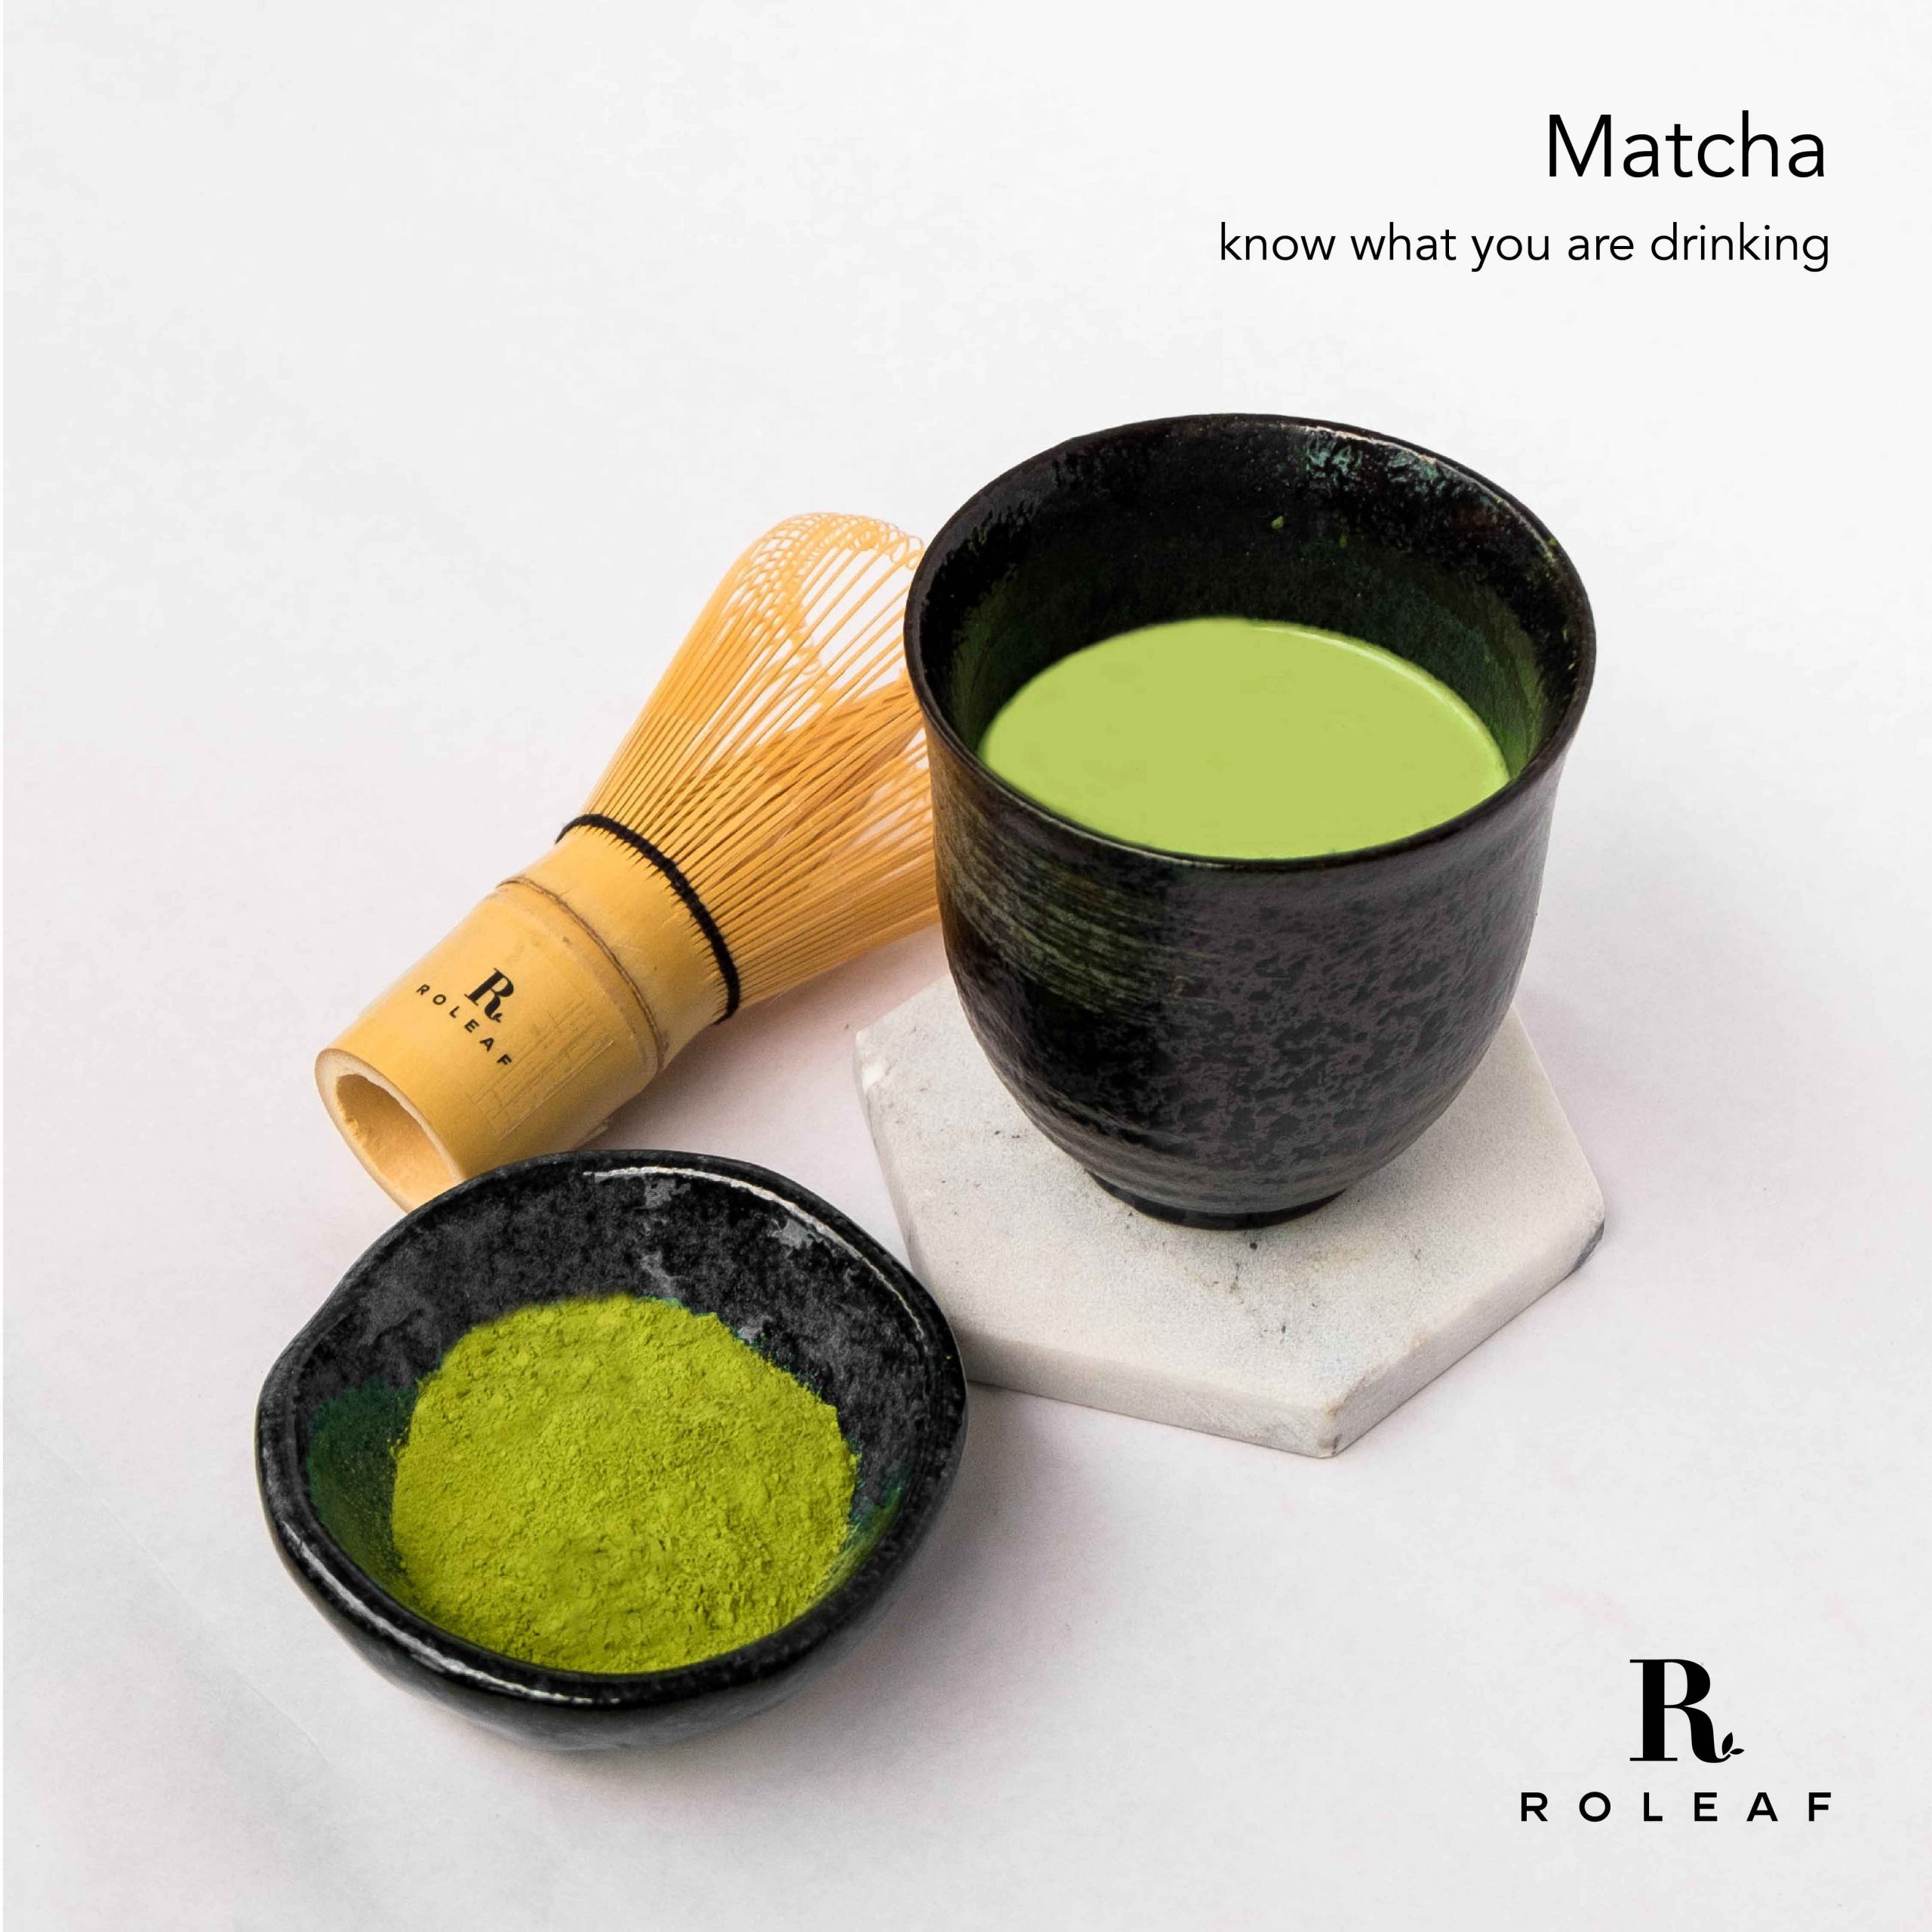 matcha - know what you are drinking